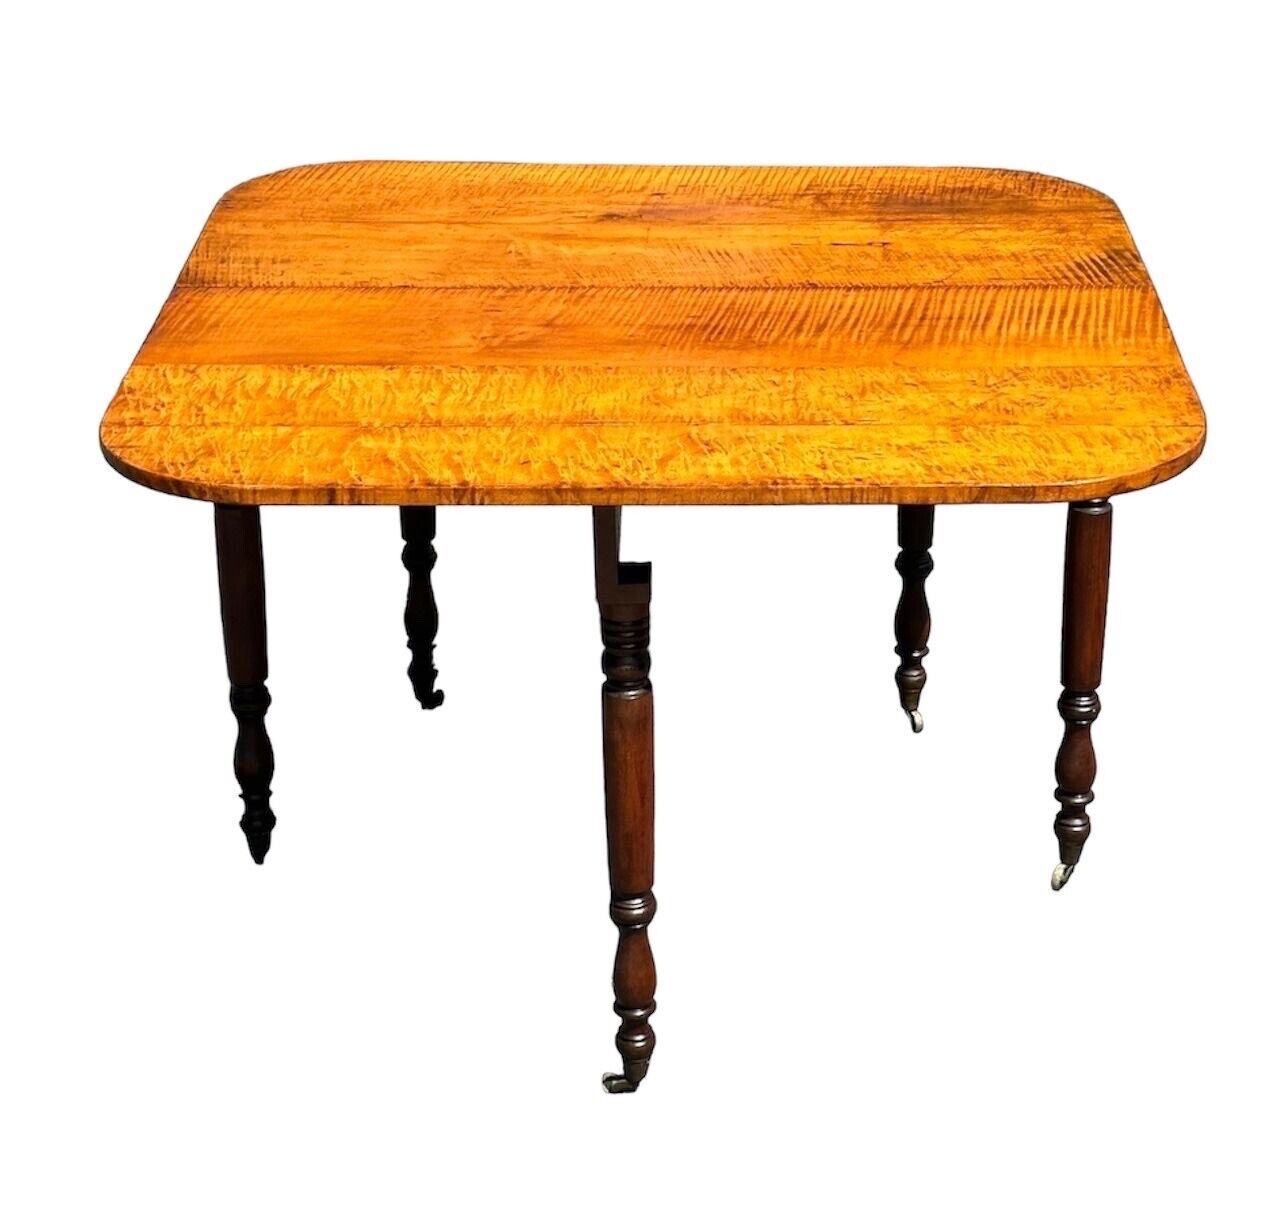 Early 19th Century Antique Federal Tiger Maple & Cherry Dropleaf Bakers Table